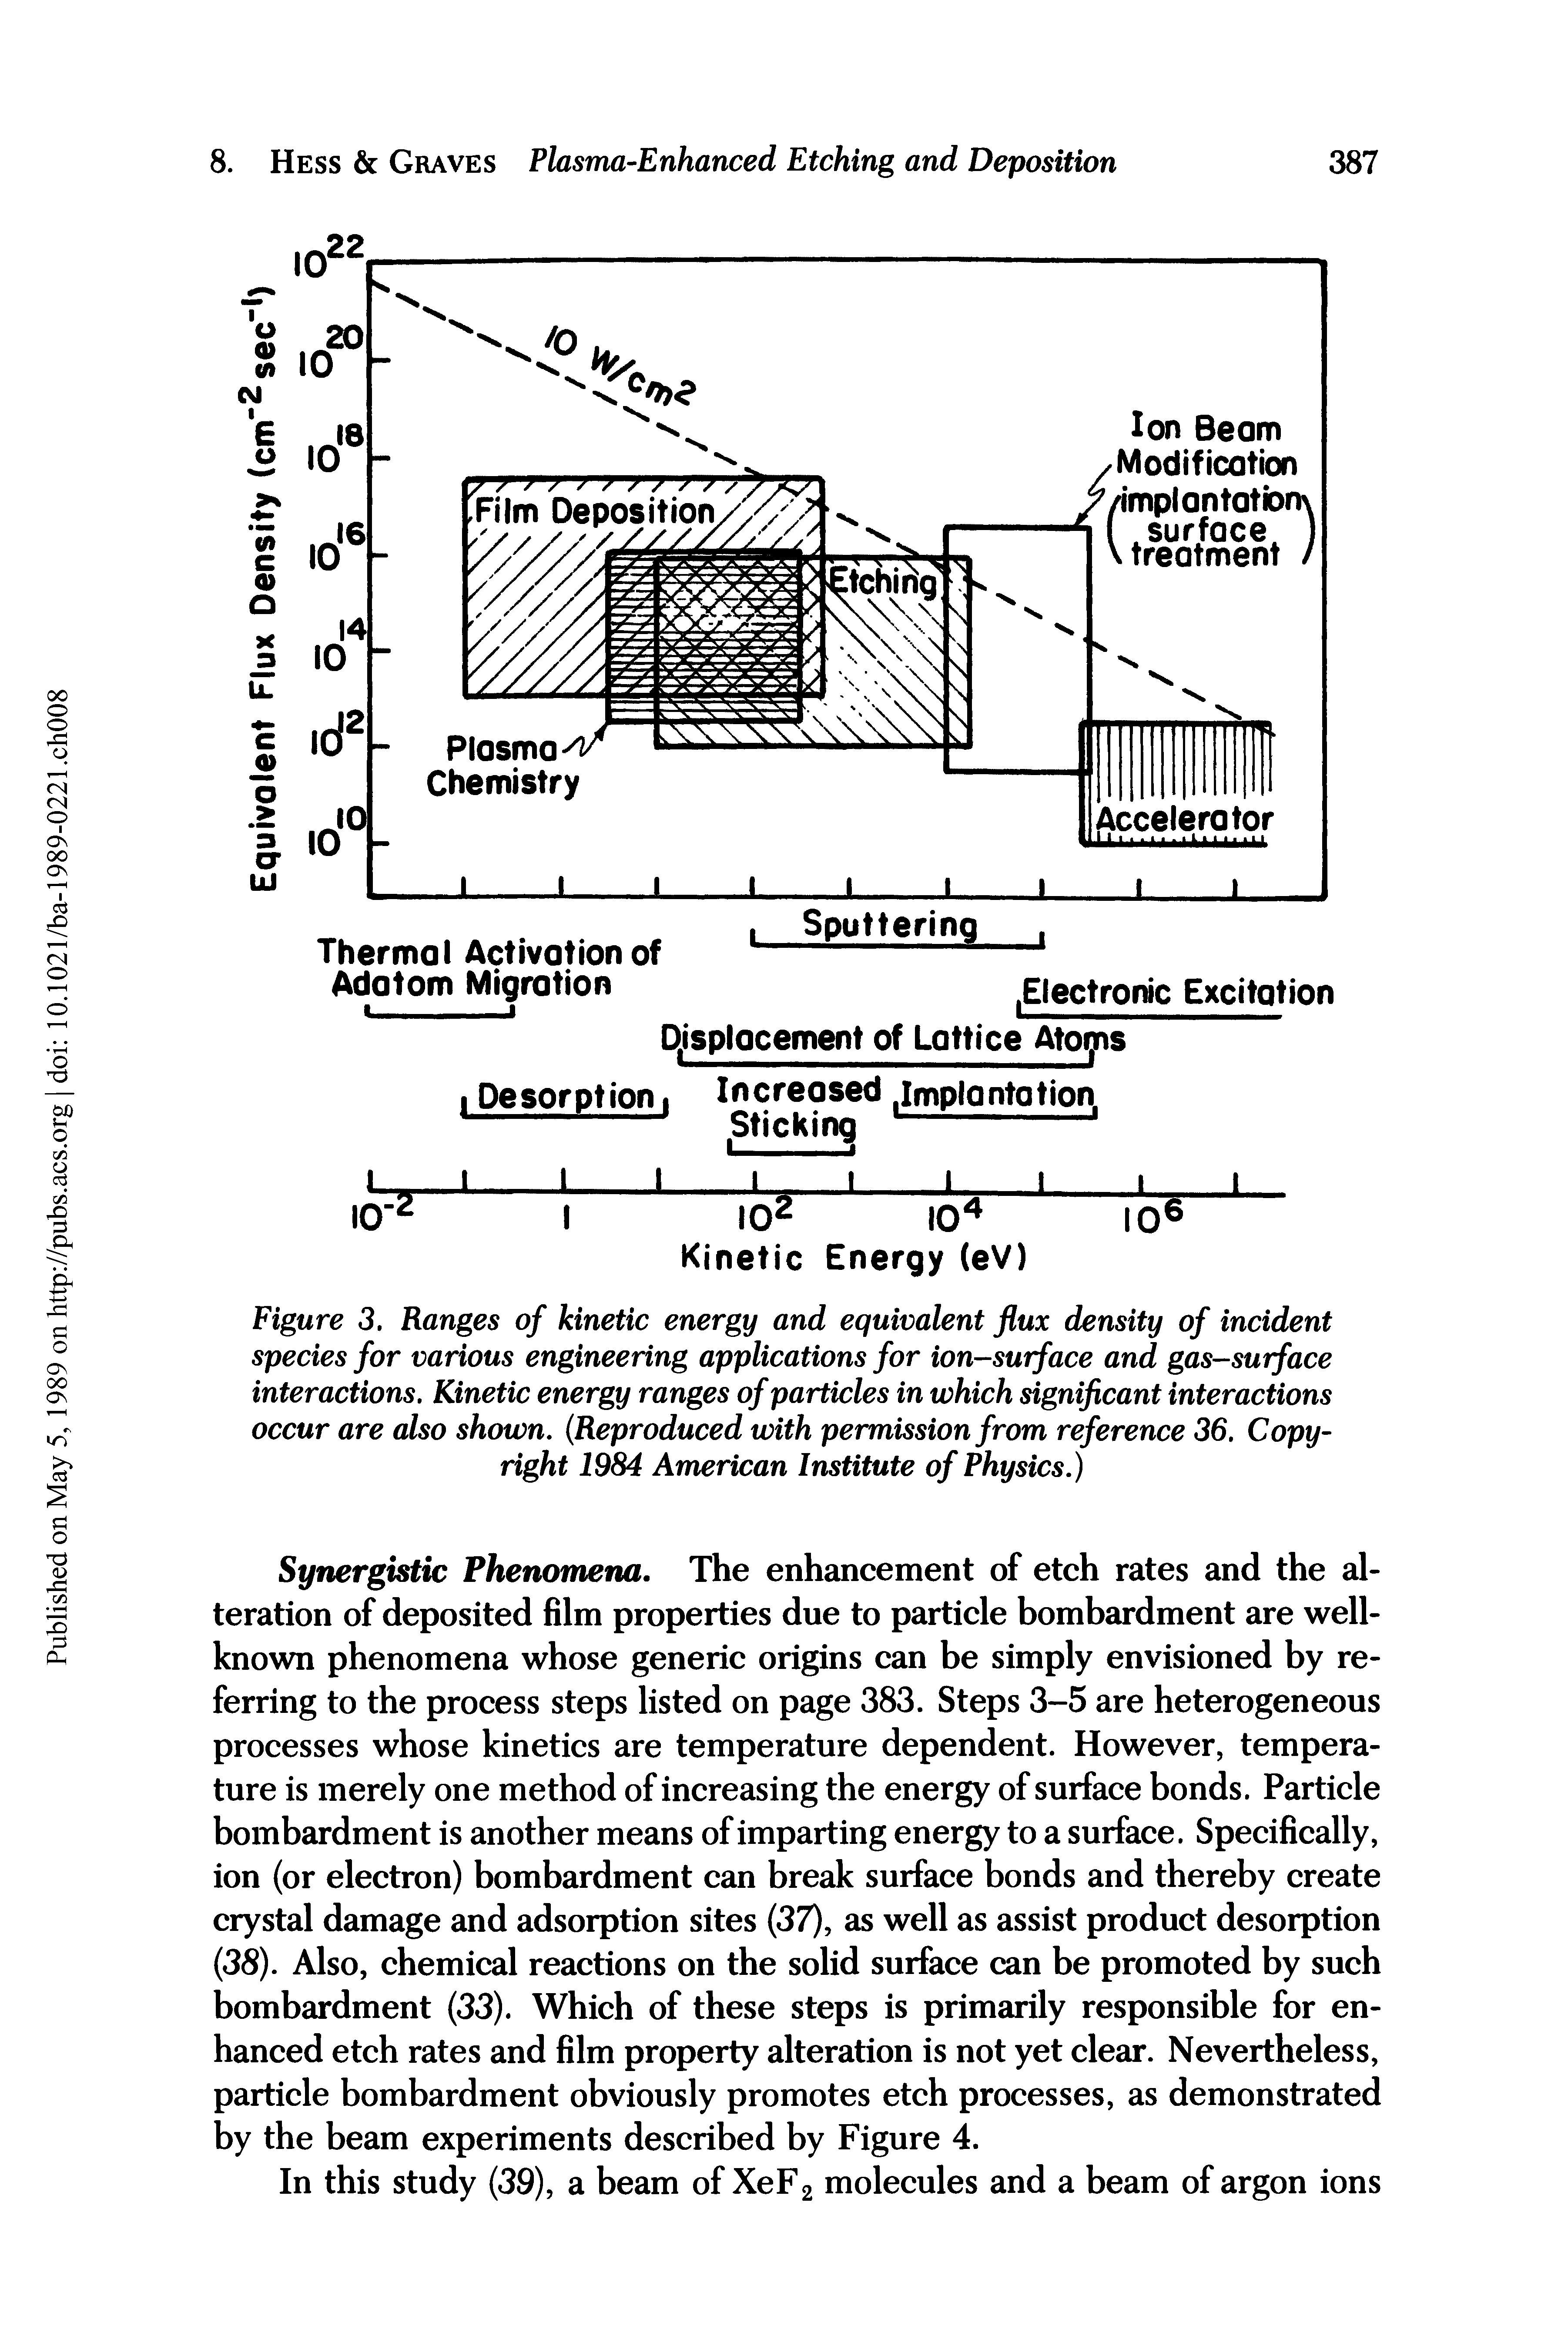 Figure 3. Ranges of kinetic energy and equivalent flux density of incident species for various engineering applications for ion-surface and gas-surface interactions. Kinetic energy ranges of particles in which significant interactions occur are also shown. (Reproduced with permission from reference 36. Copyright 1984 American Institute of Physics.)...